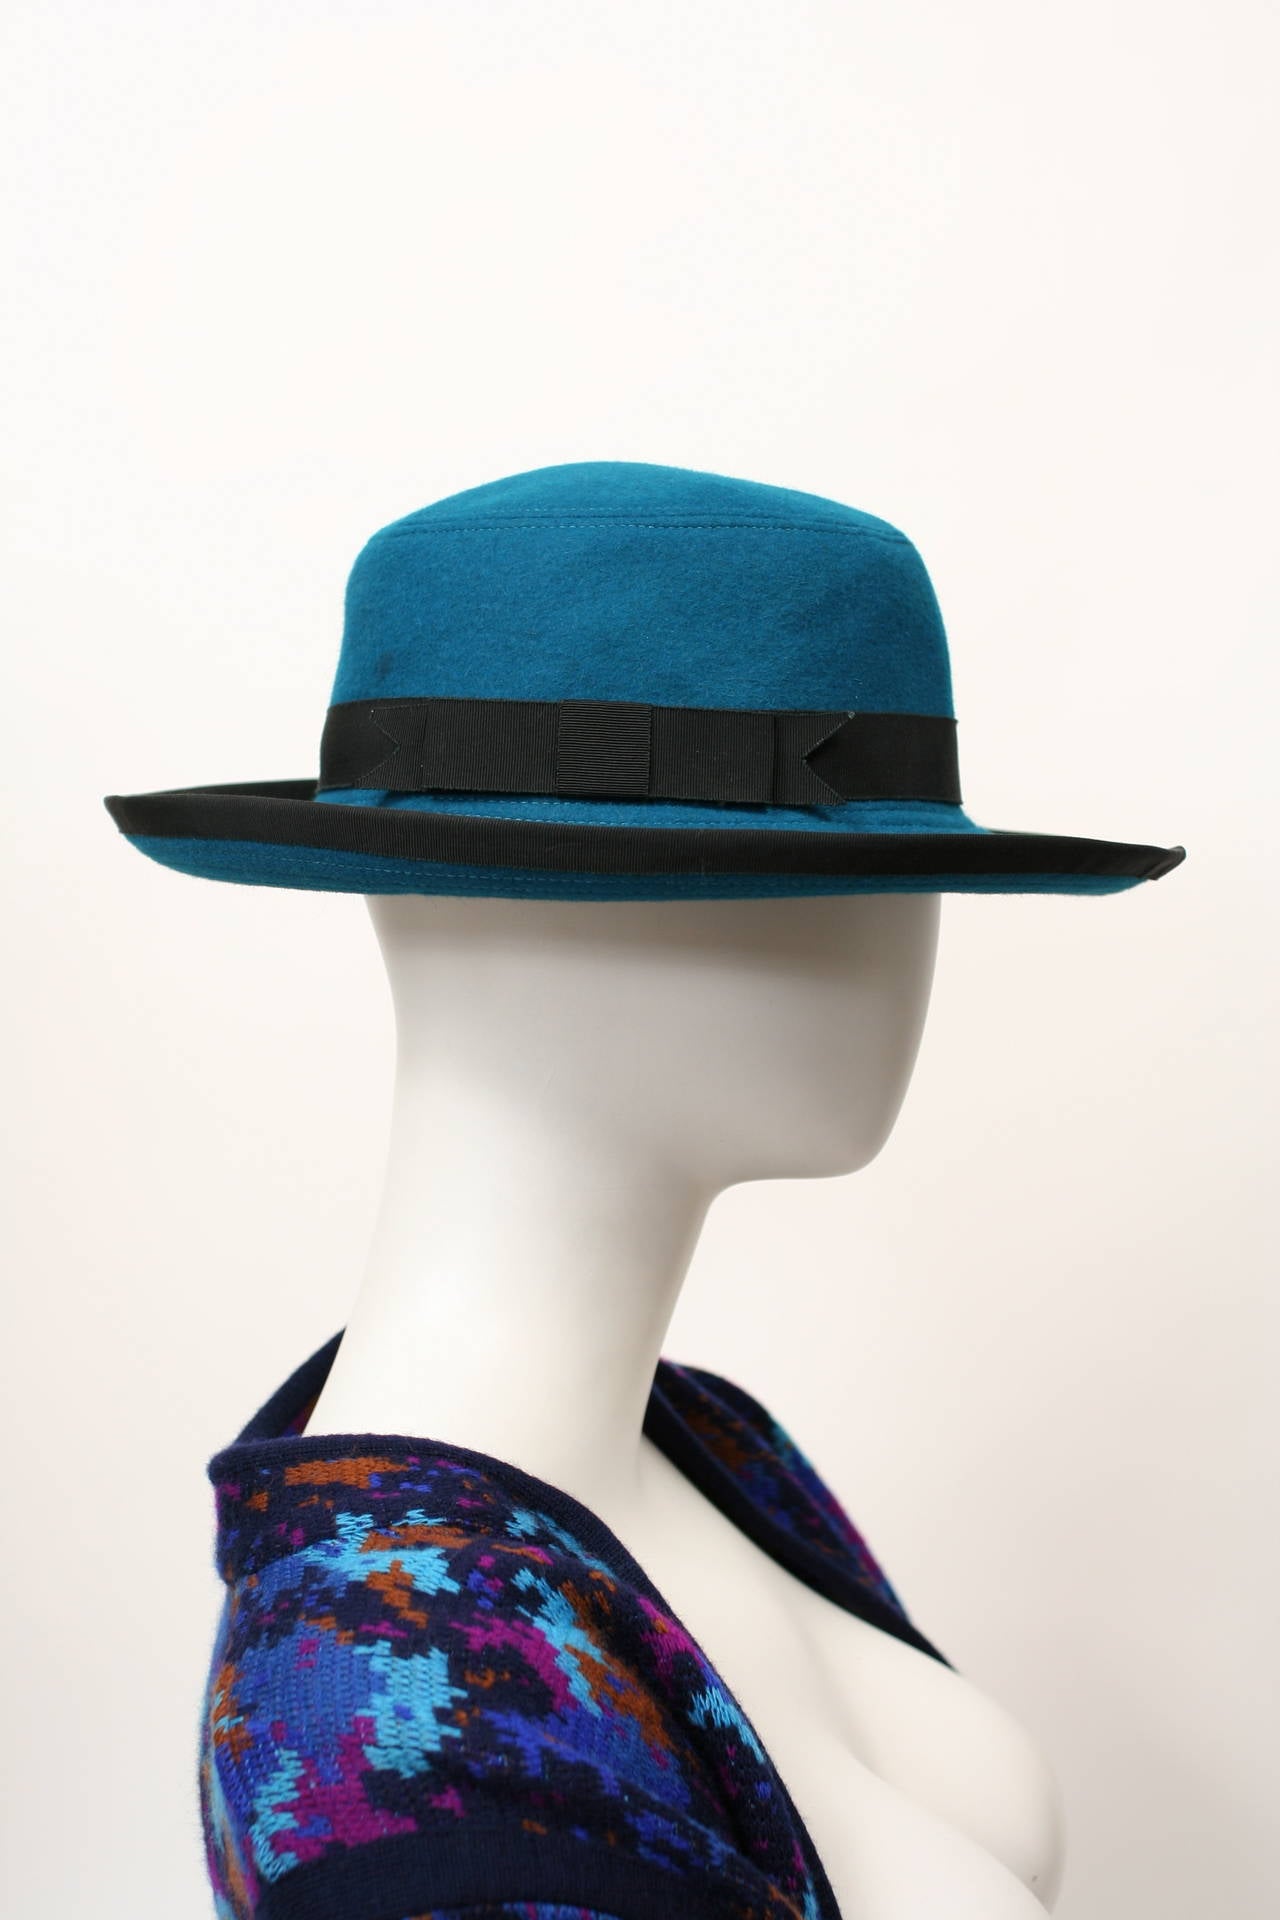 Yves Saint Laurent Teal Wool Hat YSL In Excellent Condition For Sale In New York, NY